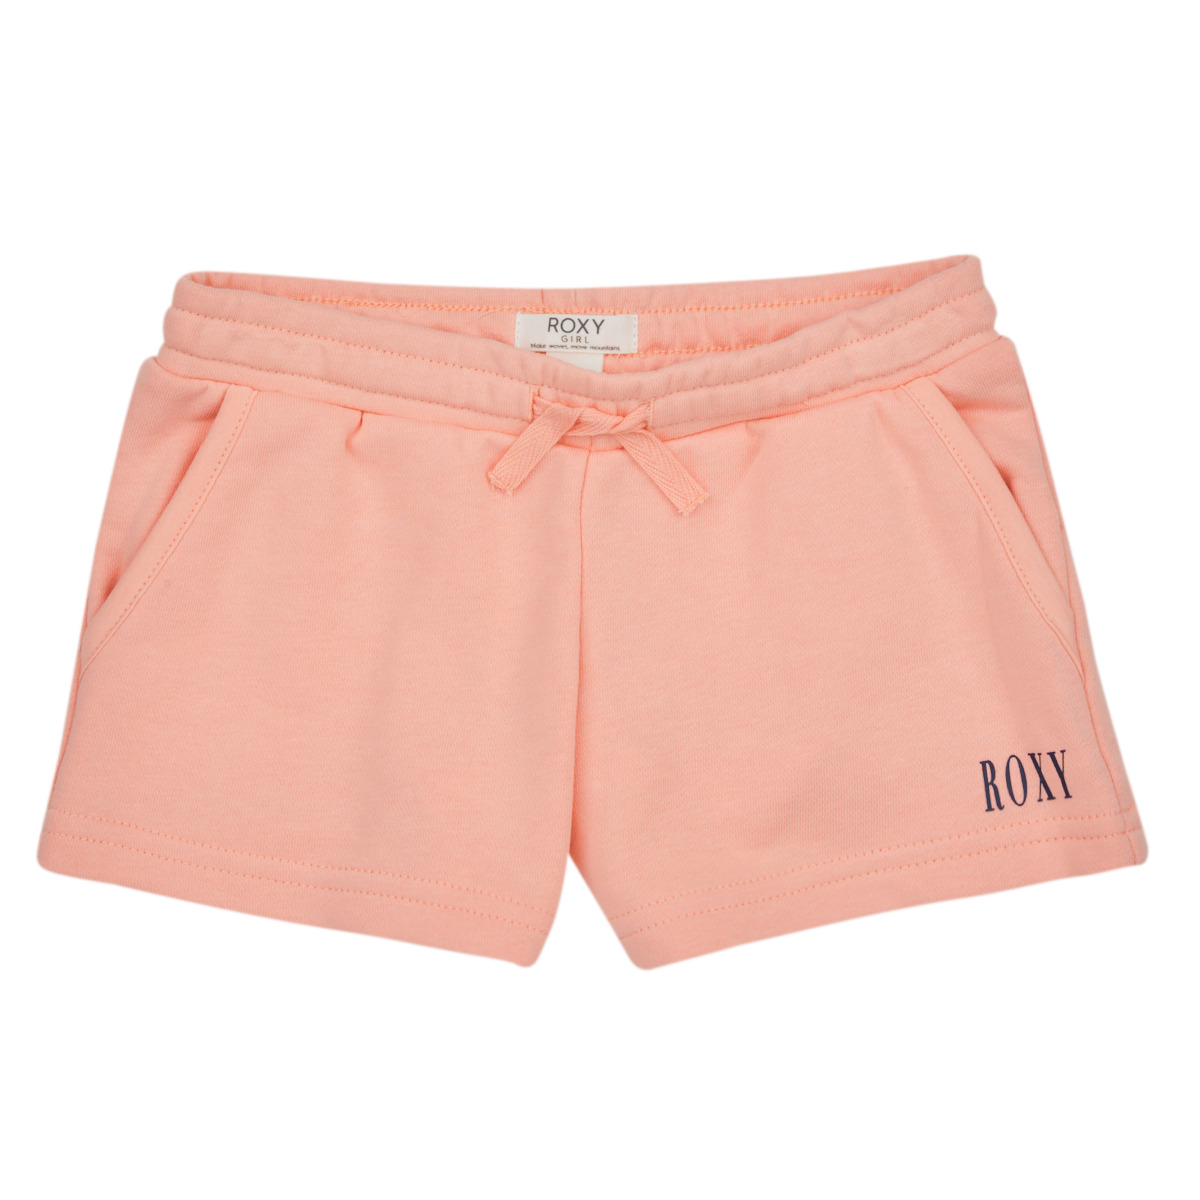 Roxy HAPPINESS FOREVER SHORT ORIGIN Pink - Free delivery | Spartoo NET ! -  Clothing Shorts / Bermudas Child